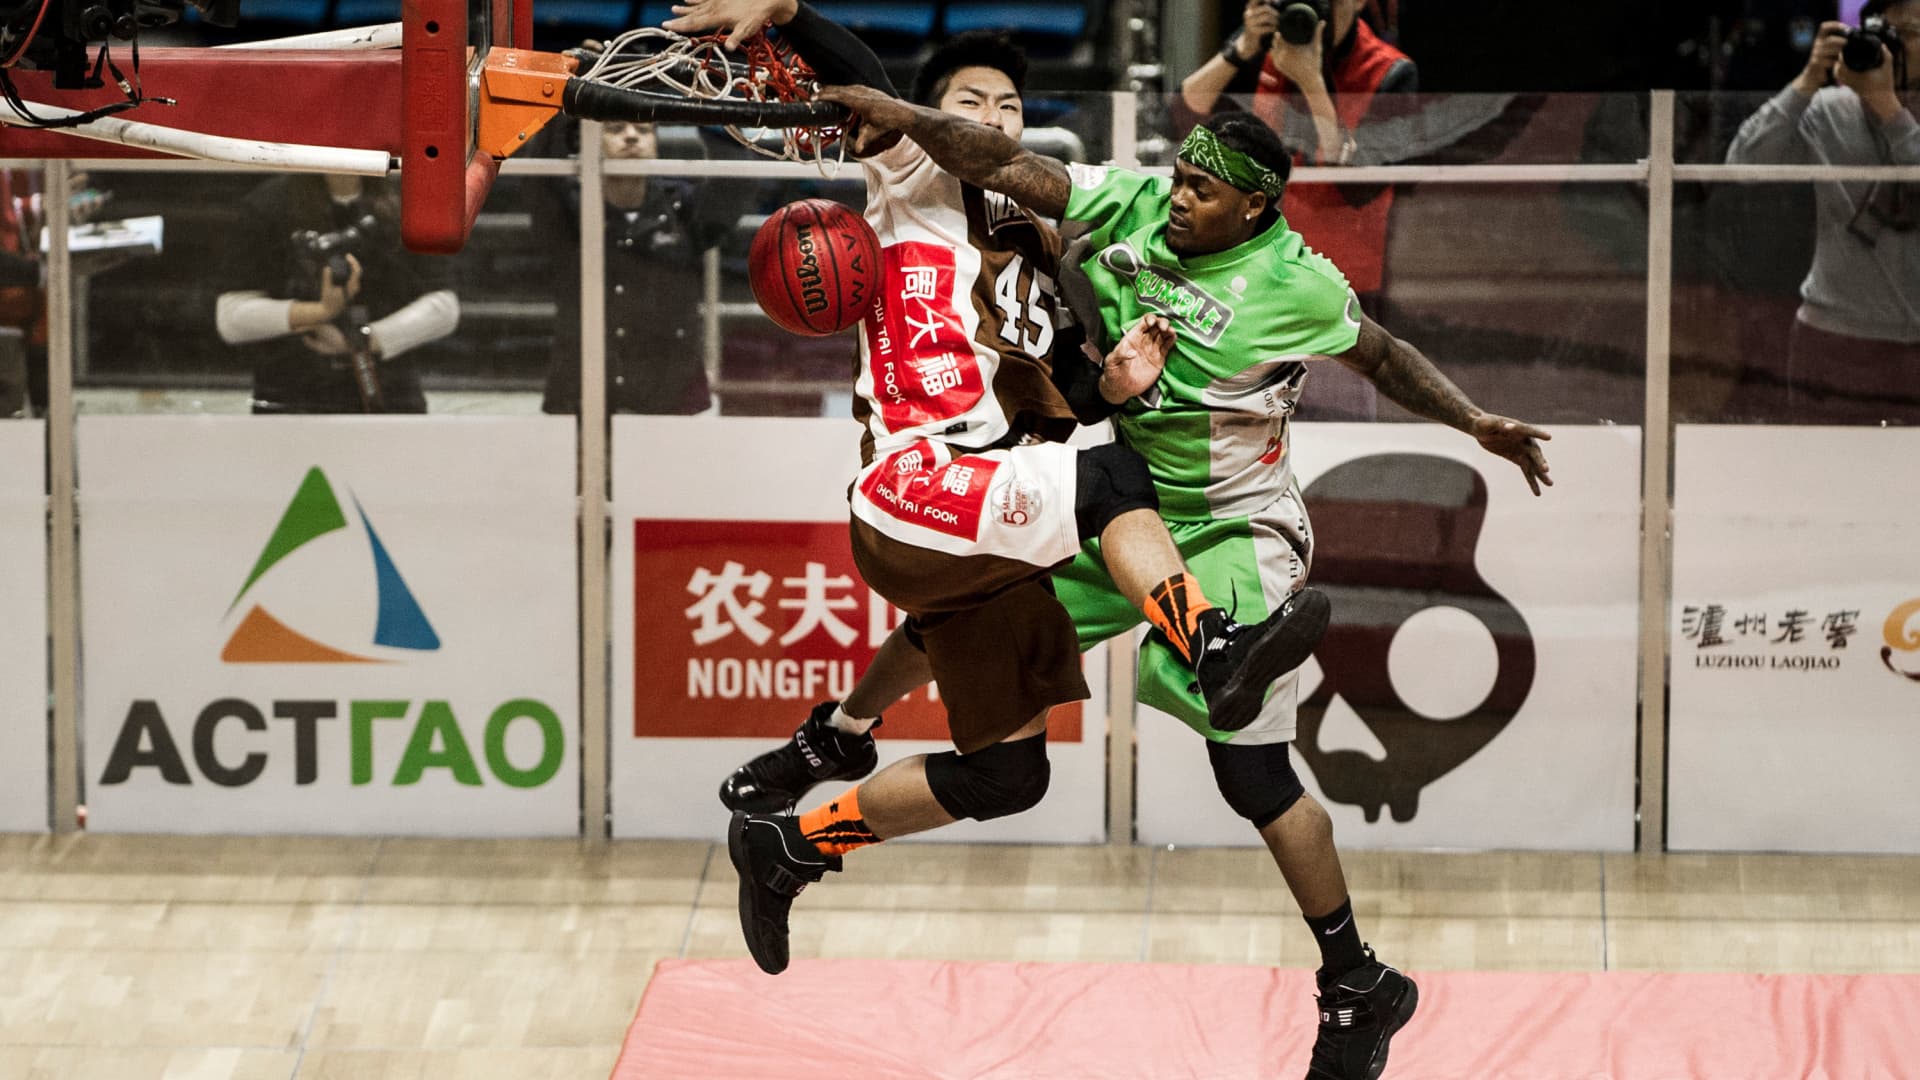 SlamBall, which mixes basketball and soccer with trampolines, snags huge traders